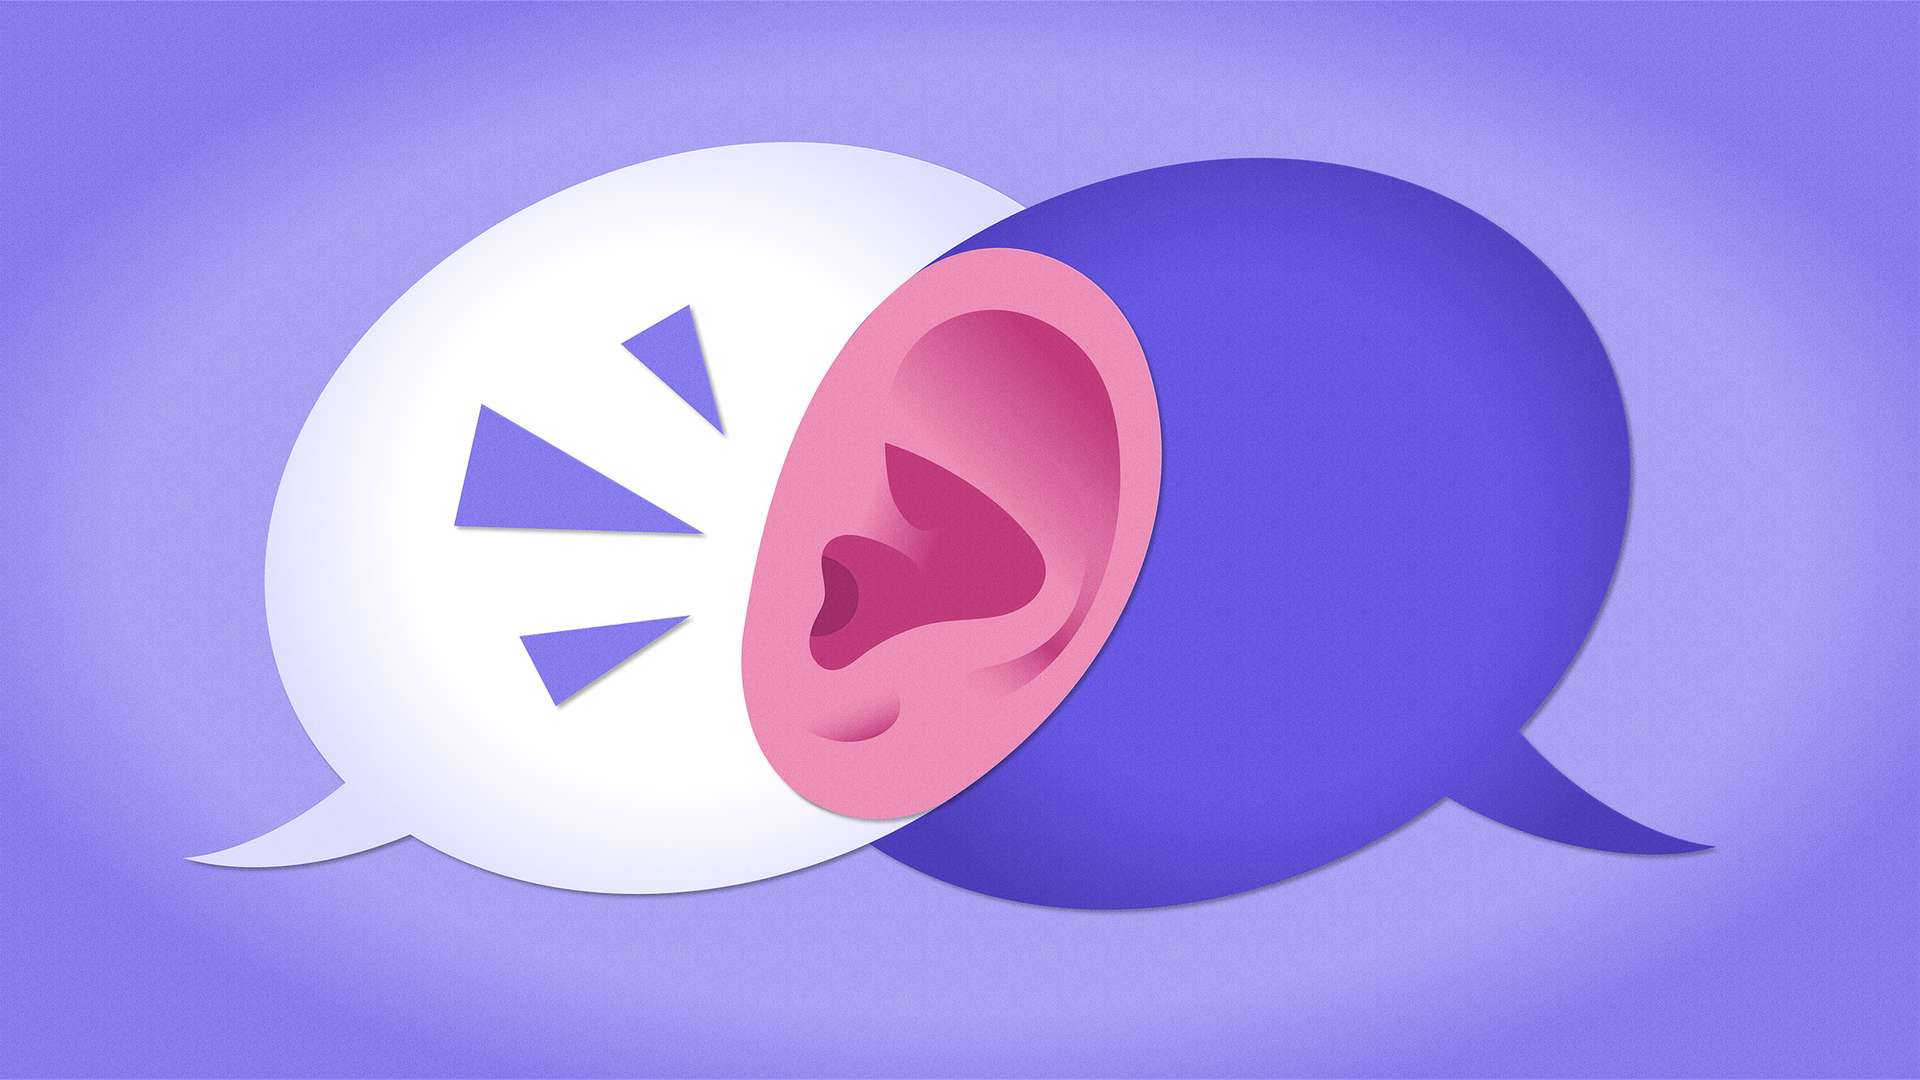 Two speech bubbles cross over each other, a listening ear where they overlap.